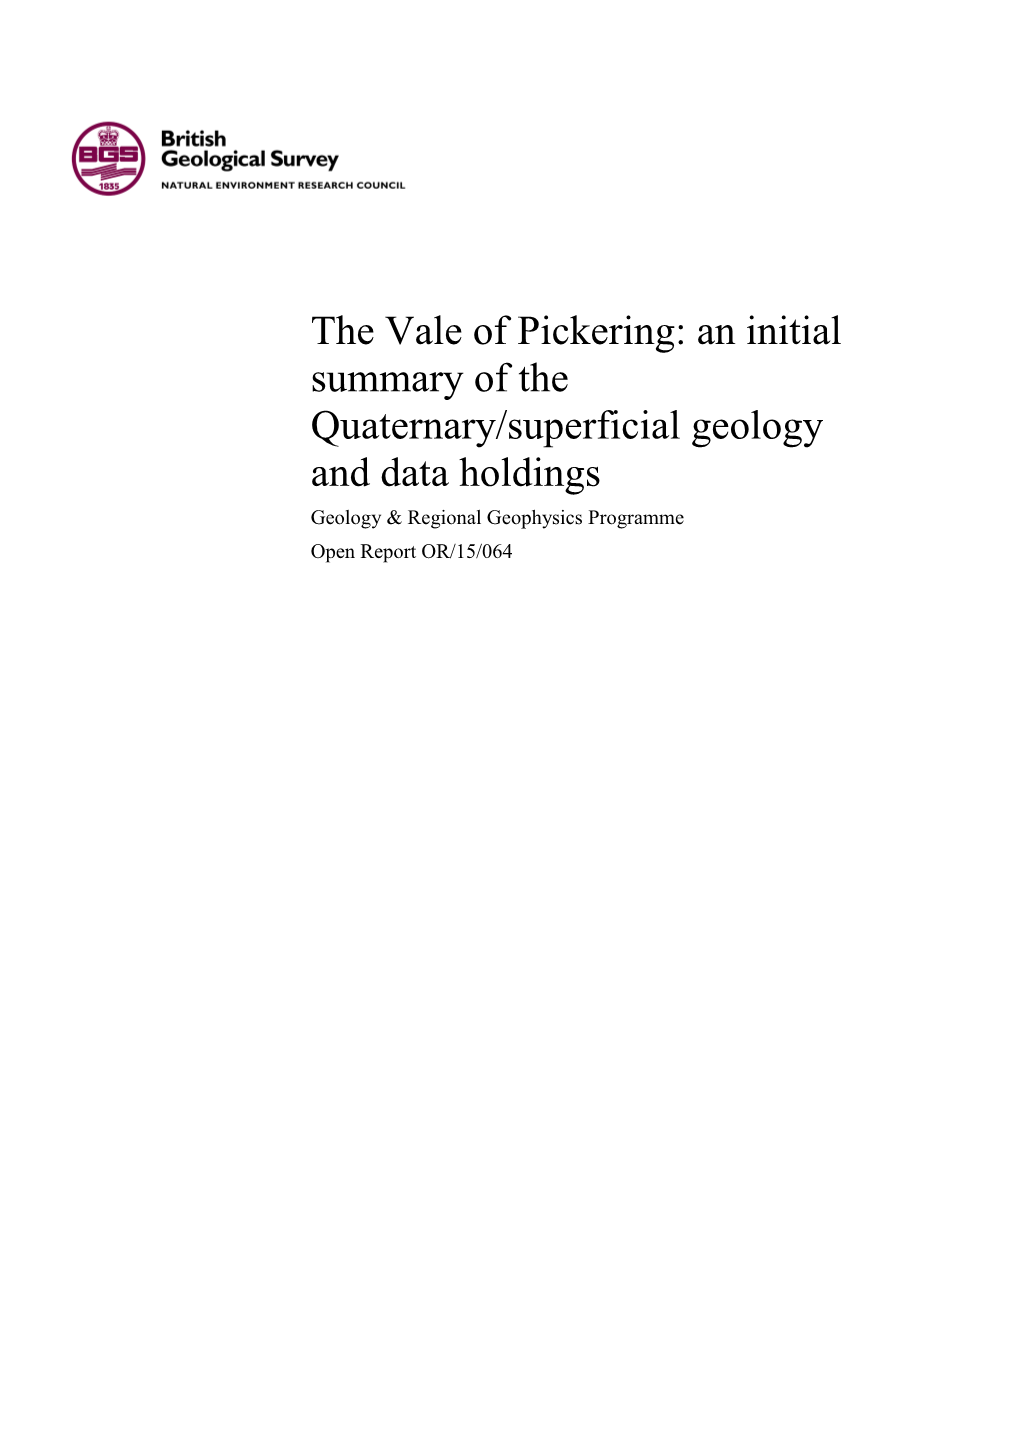 The Vale of Pickering: an Initial Summary of the Quaternary/Superficial Geology and Data Holdings Geology & Regional Geophysics Programme Open Report OR/15/064